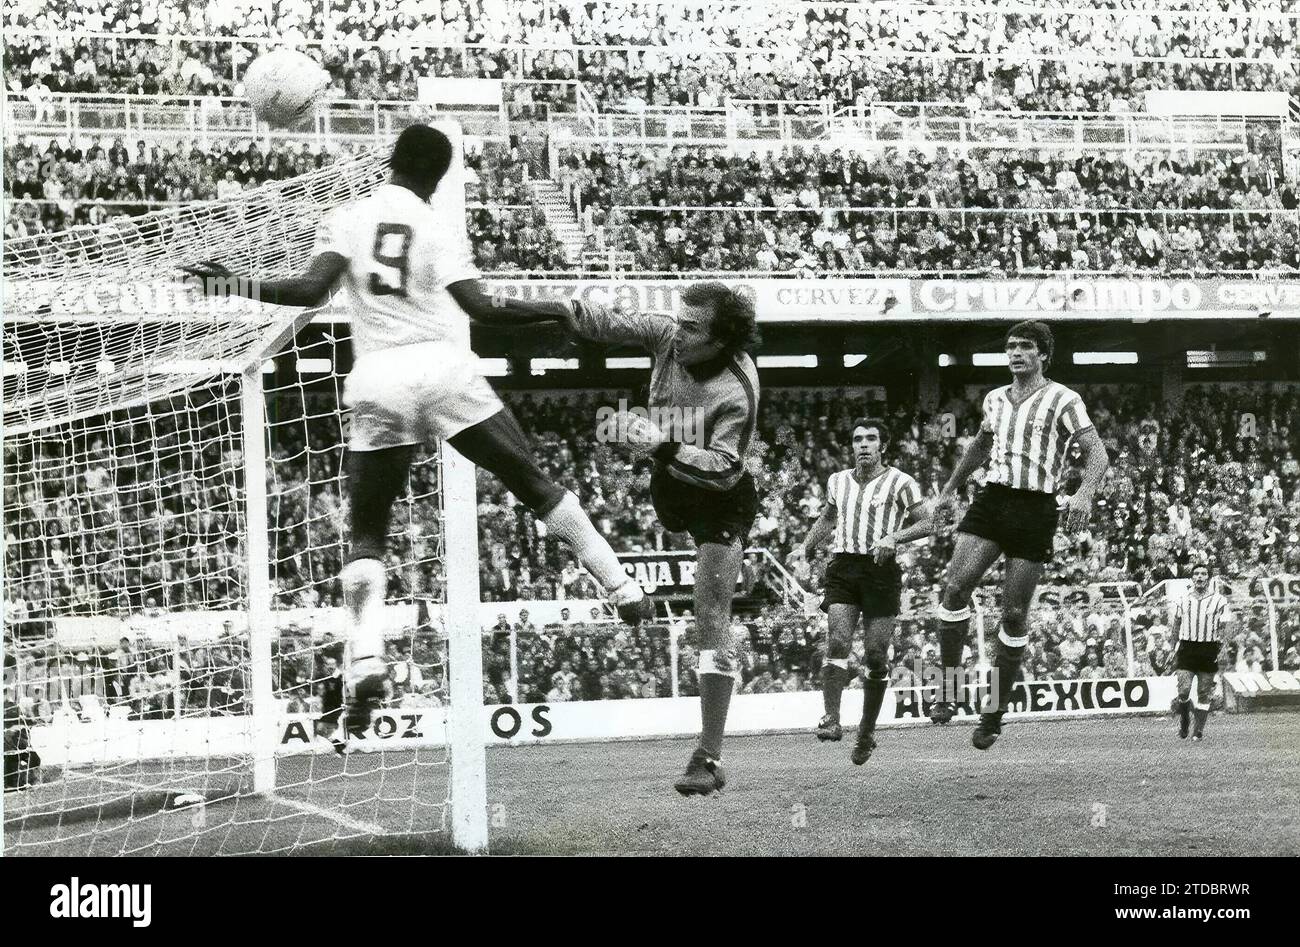 Sevilla-Betis (November 1977).- Sevilla-Betis match played on November 6, 1977 at the Sánchez-Pizjuán stadium, with Sevilla winning 1-0 with a goal from Sanjosé. Betis had won the I Copa del Rey Don Juan Carlos in the previous June. In the image appear the Sevilla striker Biri Biri (9), the Gambian so remembered by the fans, and the Betis players Esnaola (goalkeeper), Biosca, Sabaté and Benítez. Credit: Album / Archivo ABC / Sanvicente Stock Photo